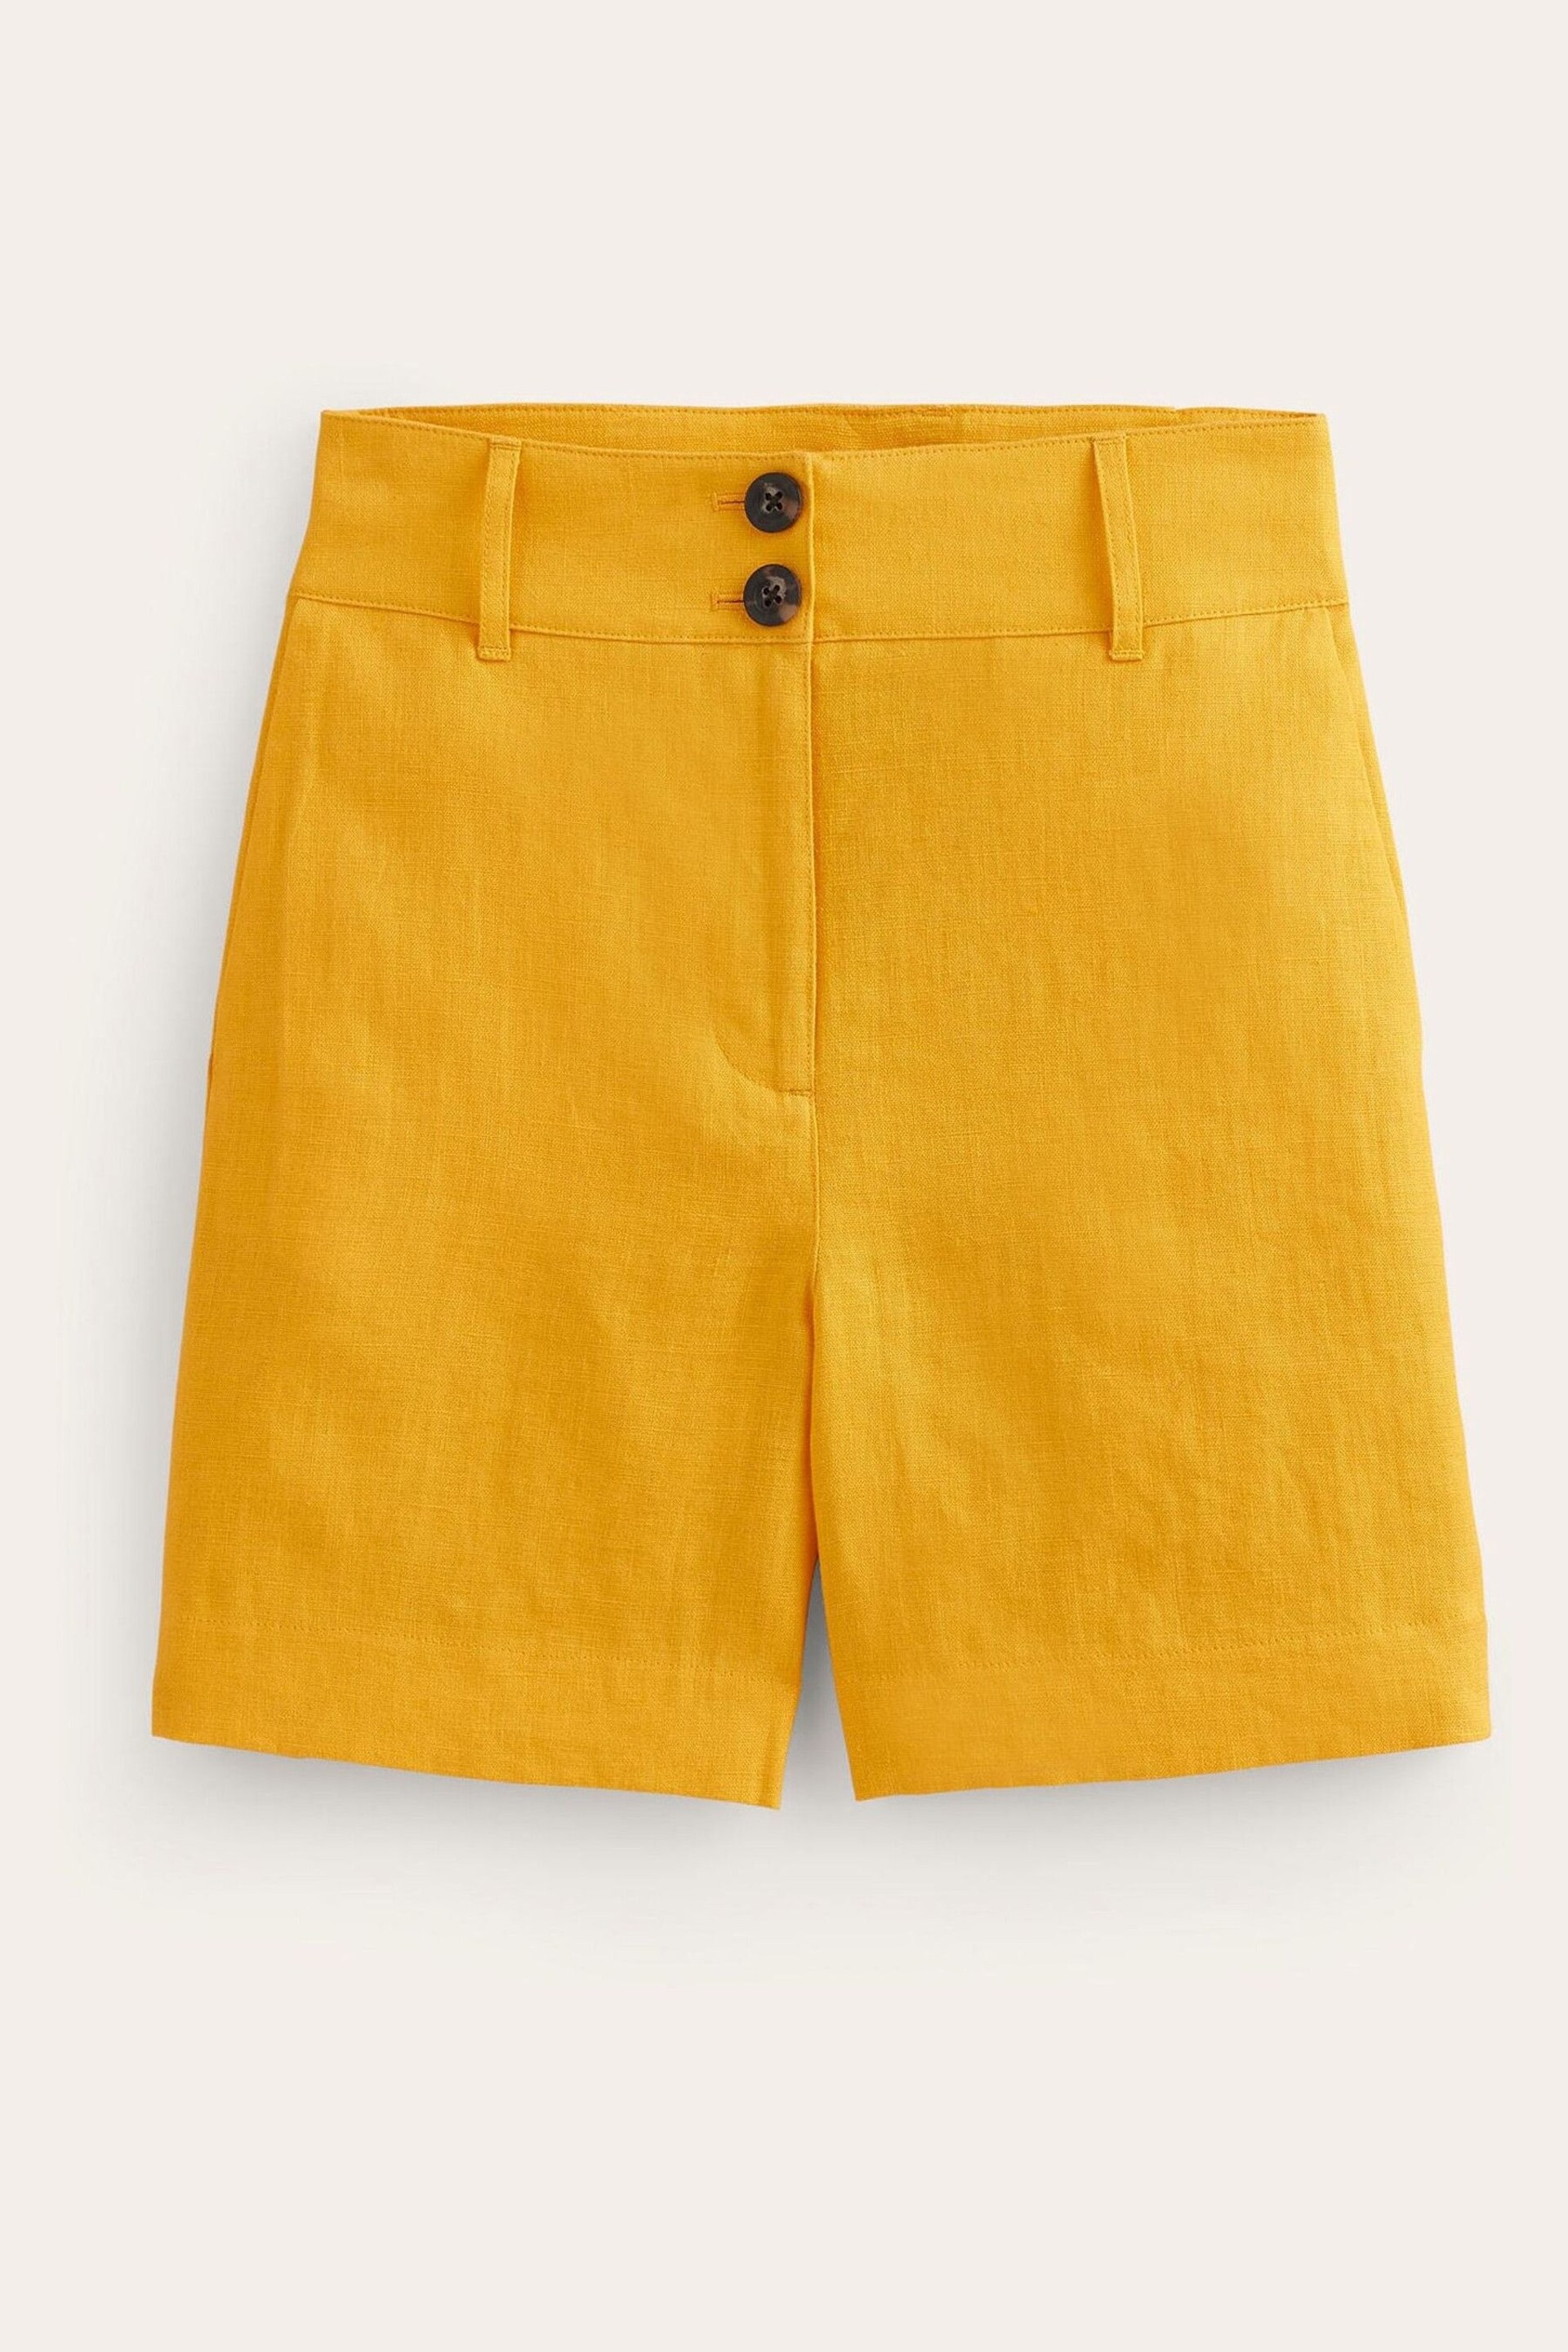 Boden Yellow Petite Westbourne Linen Shorts - Image 5 of 5